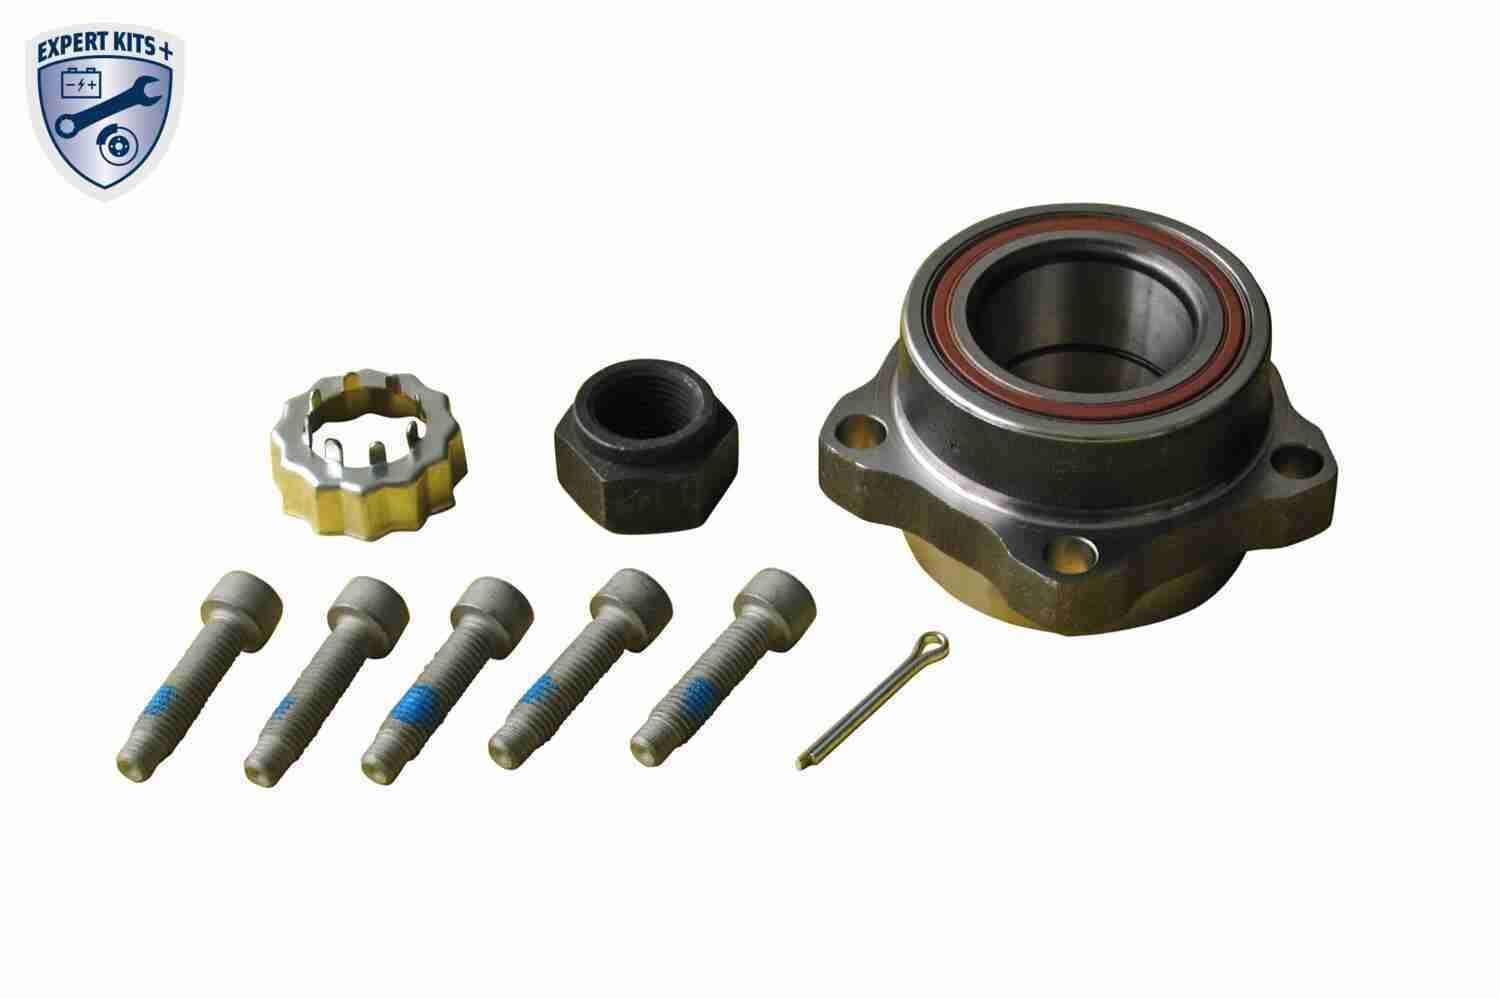 VAICO Front Axle, with attachment material, EXPERT KITS +, with integrated magnetic sensor ring, 110 mm Wheel hub bearing V25-0361 buy